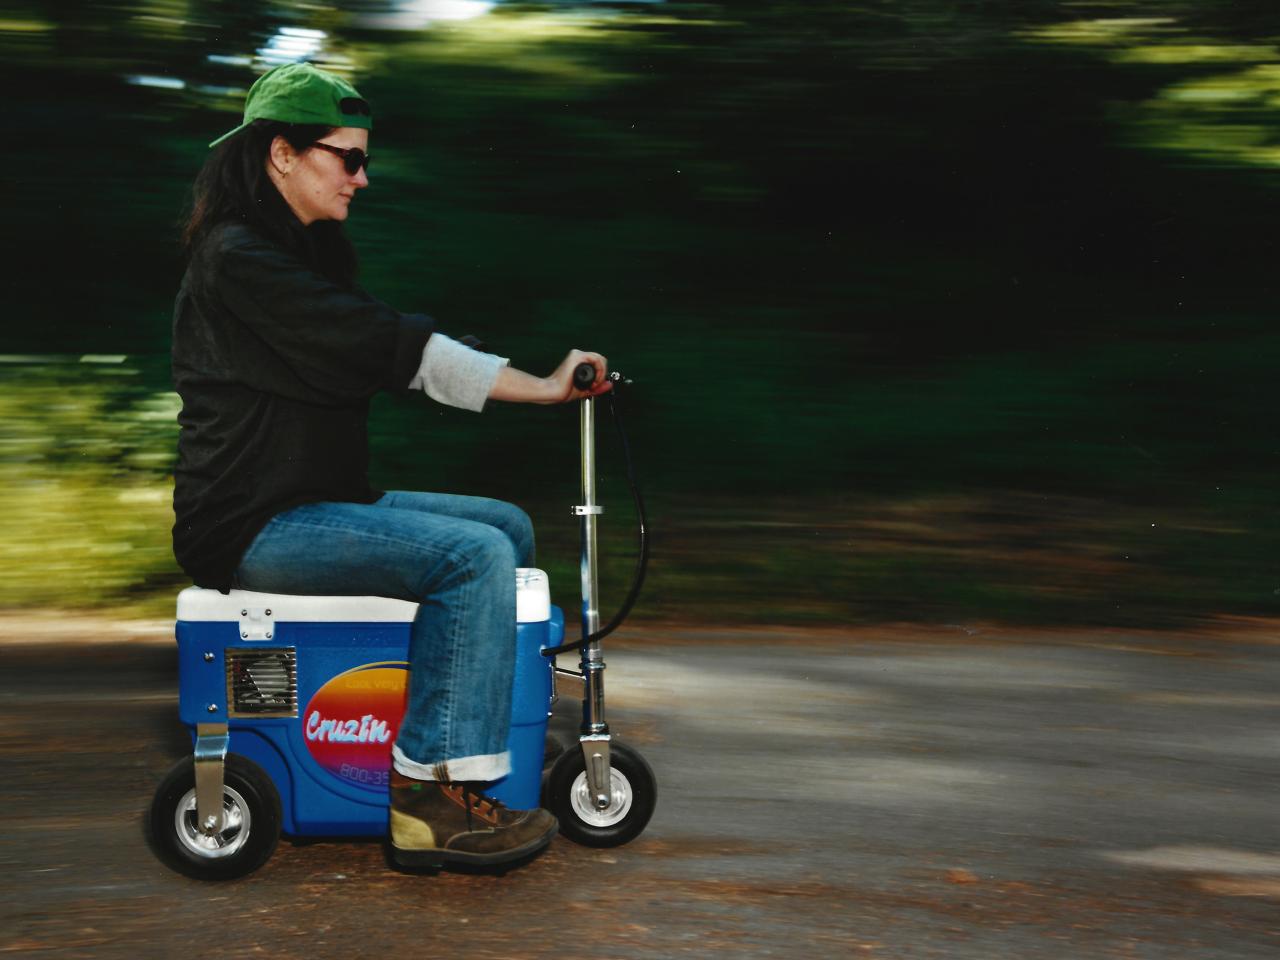 A woman is riding on a vehicle that looks like a cooler with wheels.